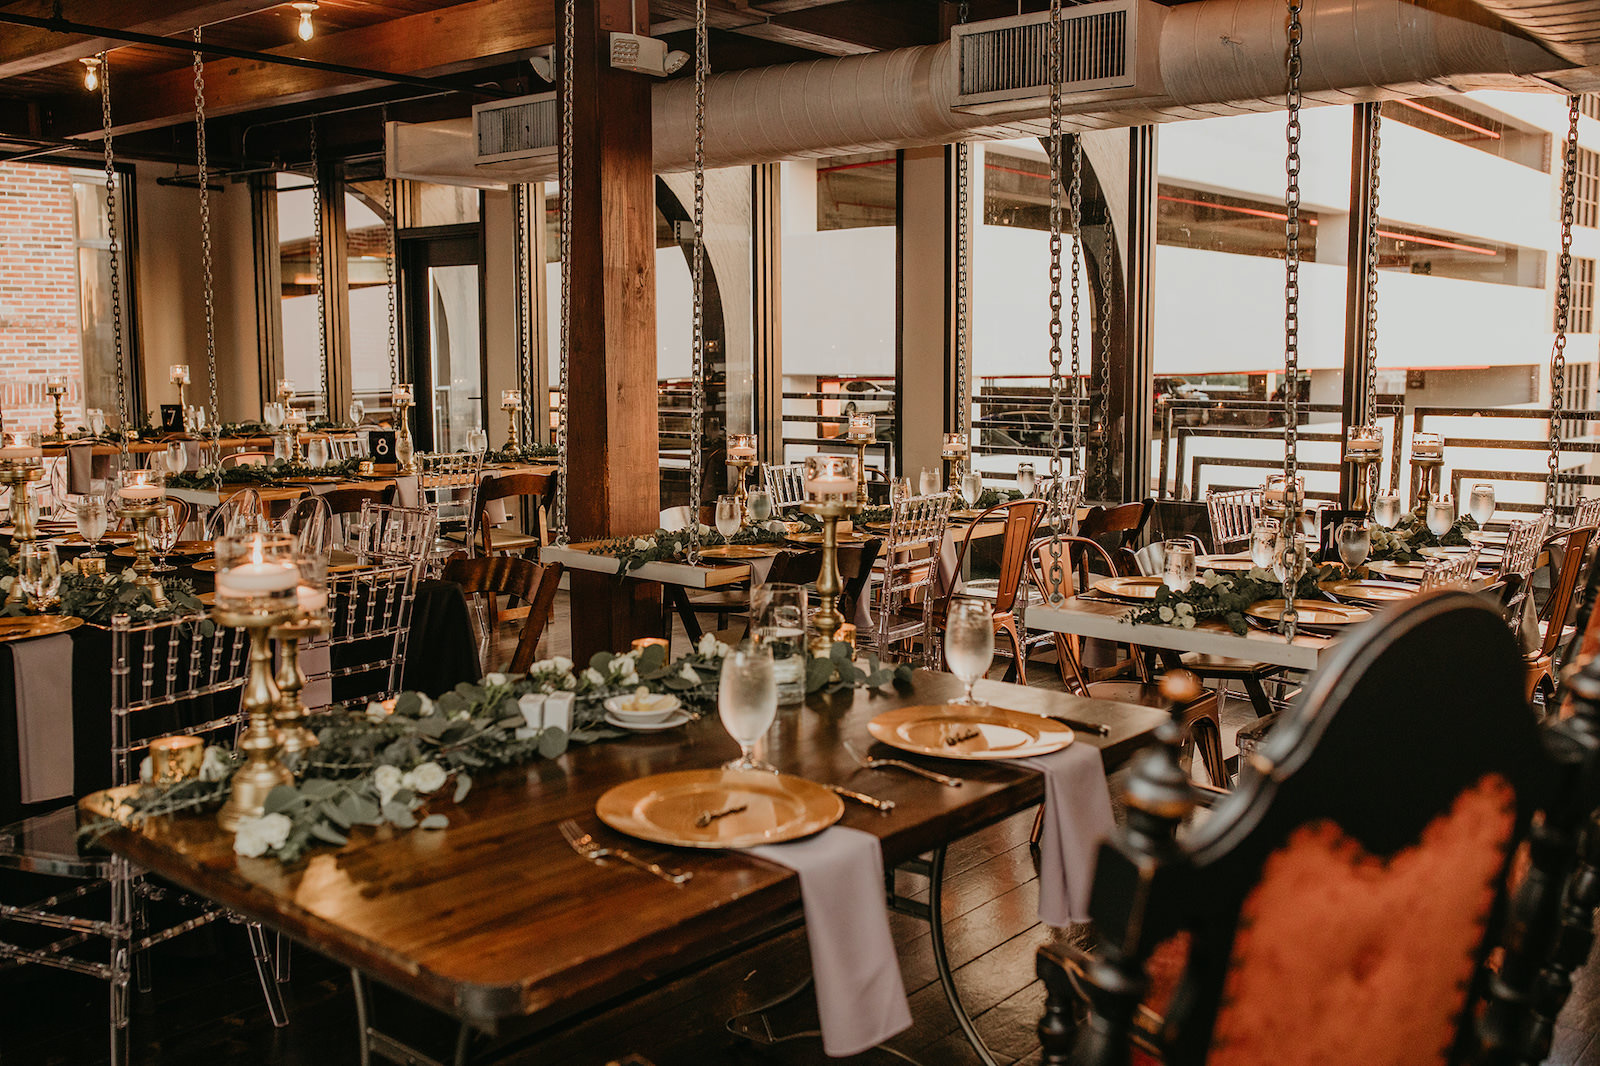 Boho Industrial Wedding Reception with Wooden Tables and Greenery | Unique, Historic Downtown St. Pete Wedding Venue Station House | St. Petersburg Wedding Planner Blue Skies Events